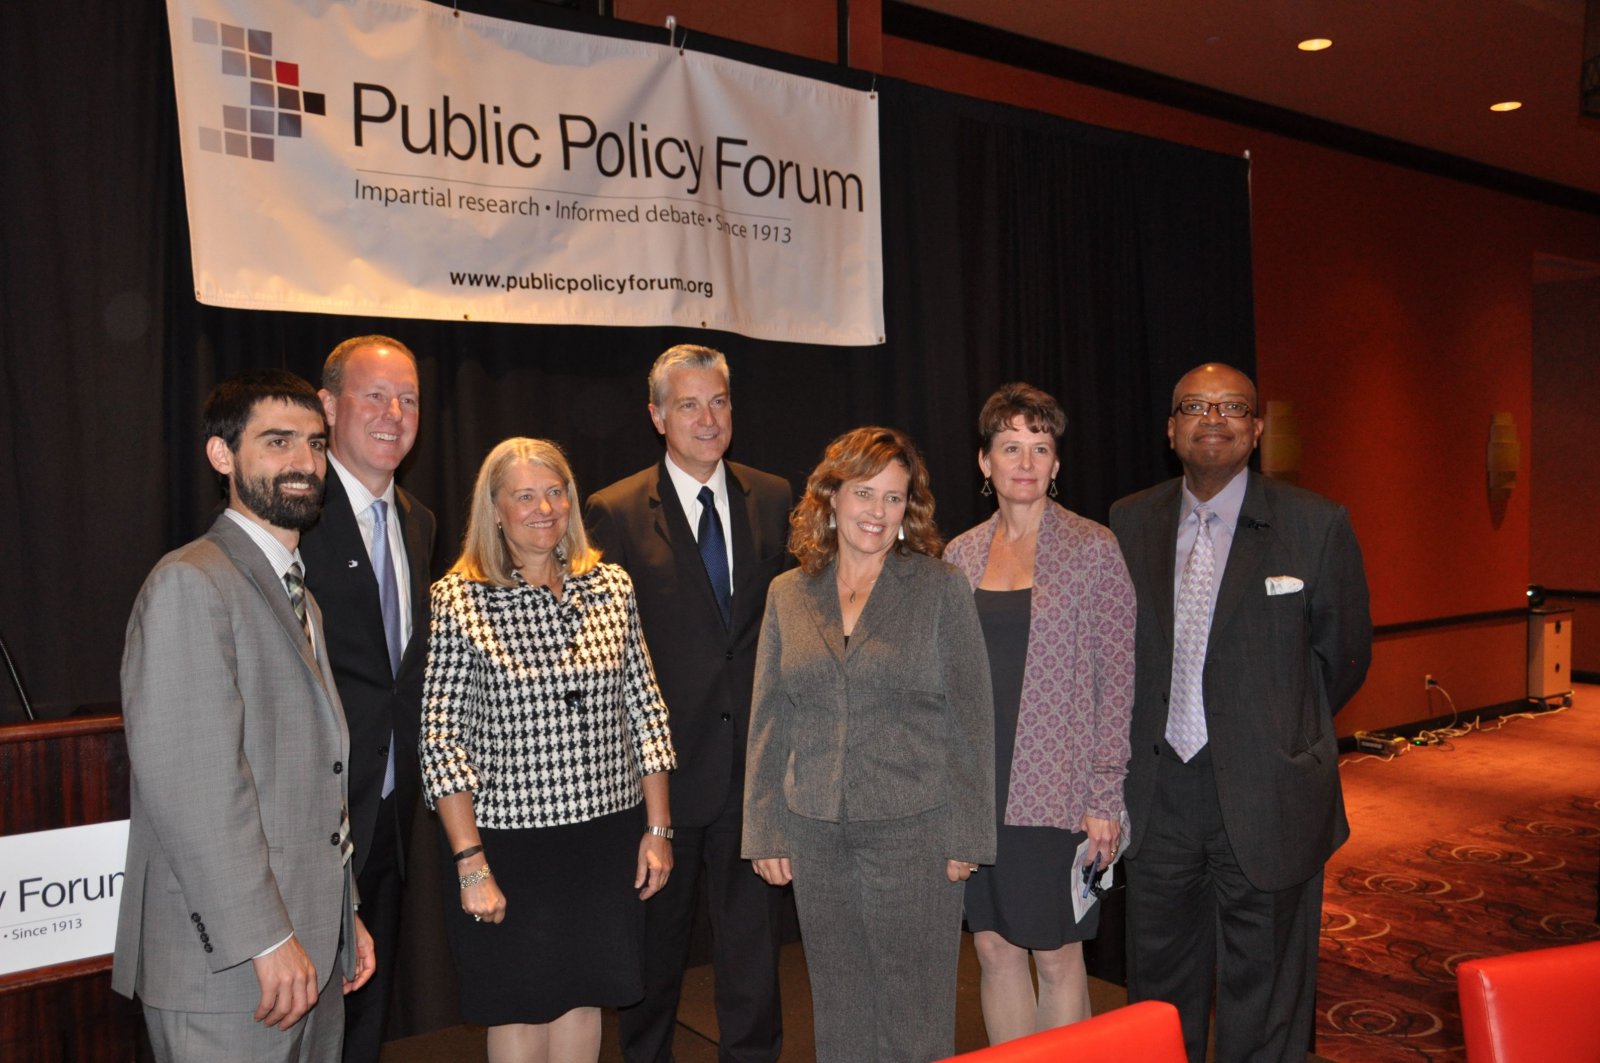 Joe Peterangelo, Public Policy Forum, David Misky, RACM, Julia Taylor, Greater Milwaukee Foundation, Mike Gousha, Marquette Law and Public Policy Fellow, Laura Bray, Menomonee Valley Partners, Kathryn Dunn, Greater Milwaukee, Foundation, Wyman Winston, Transform Milwaukee. Photo taken September 20th, 2014 by Susan Nusser